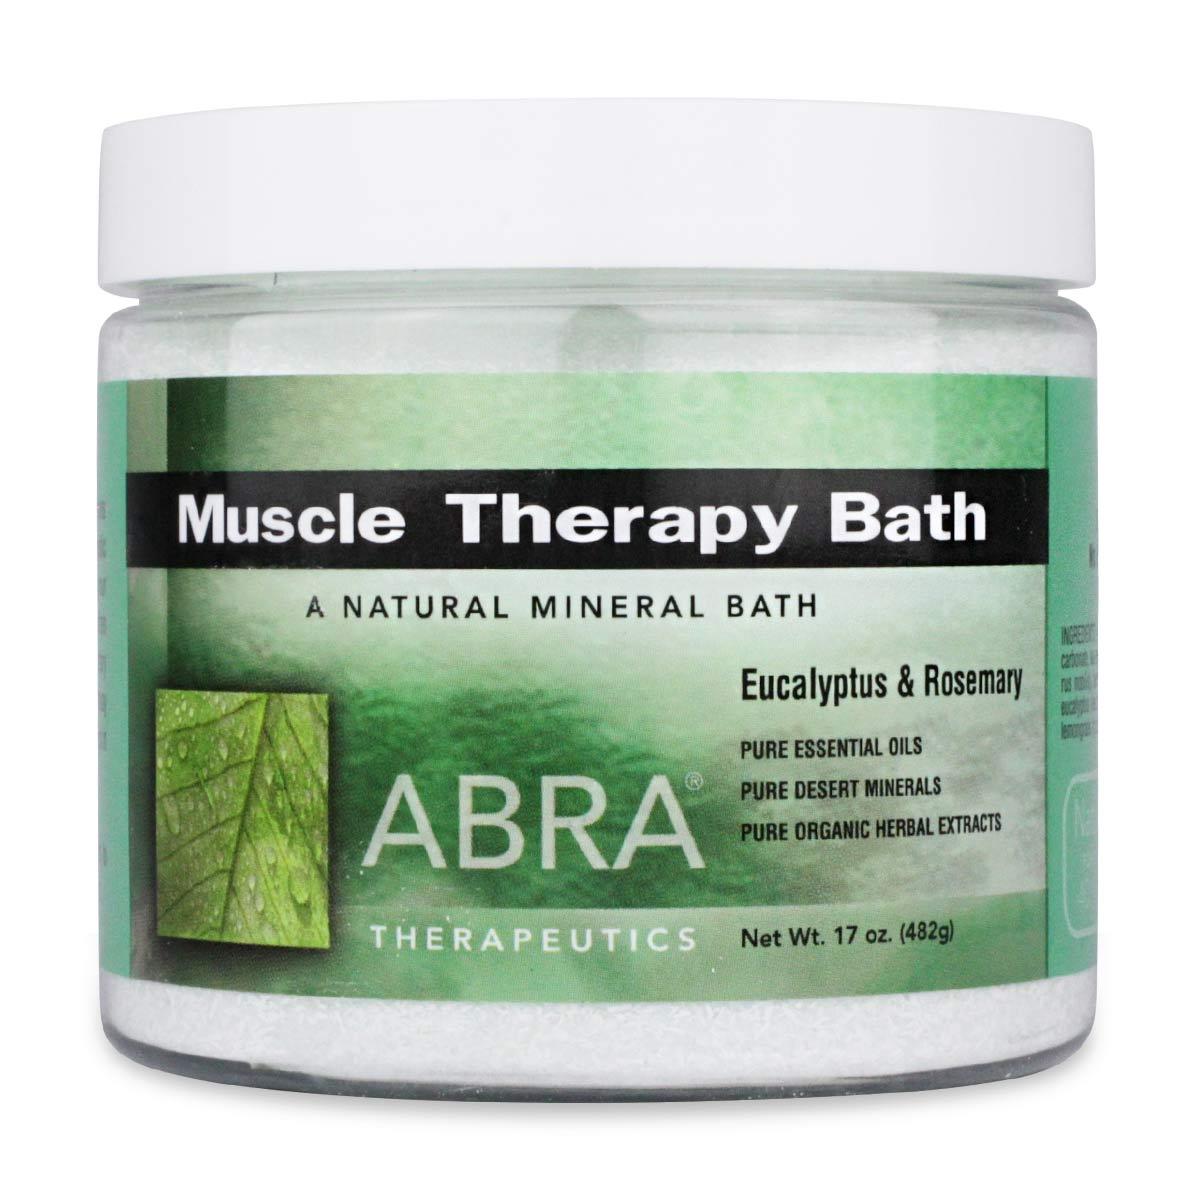 Primary image of Muscle Therapy Bath